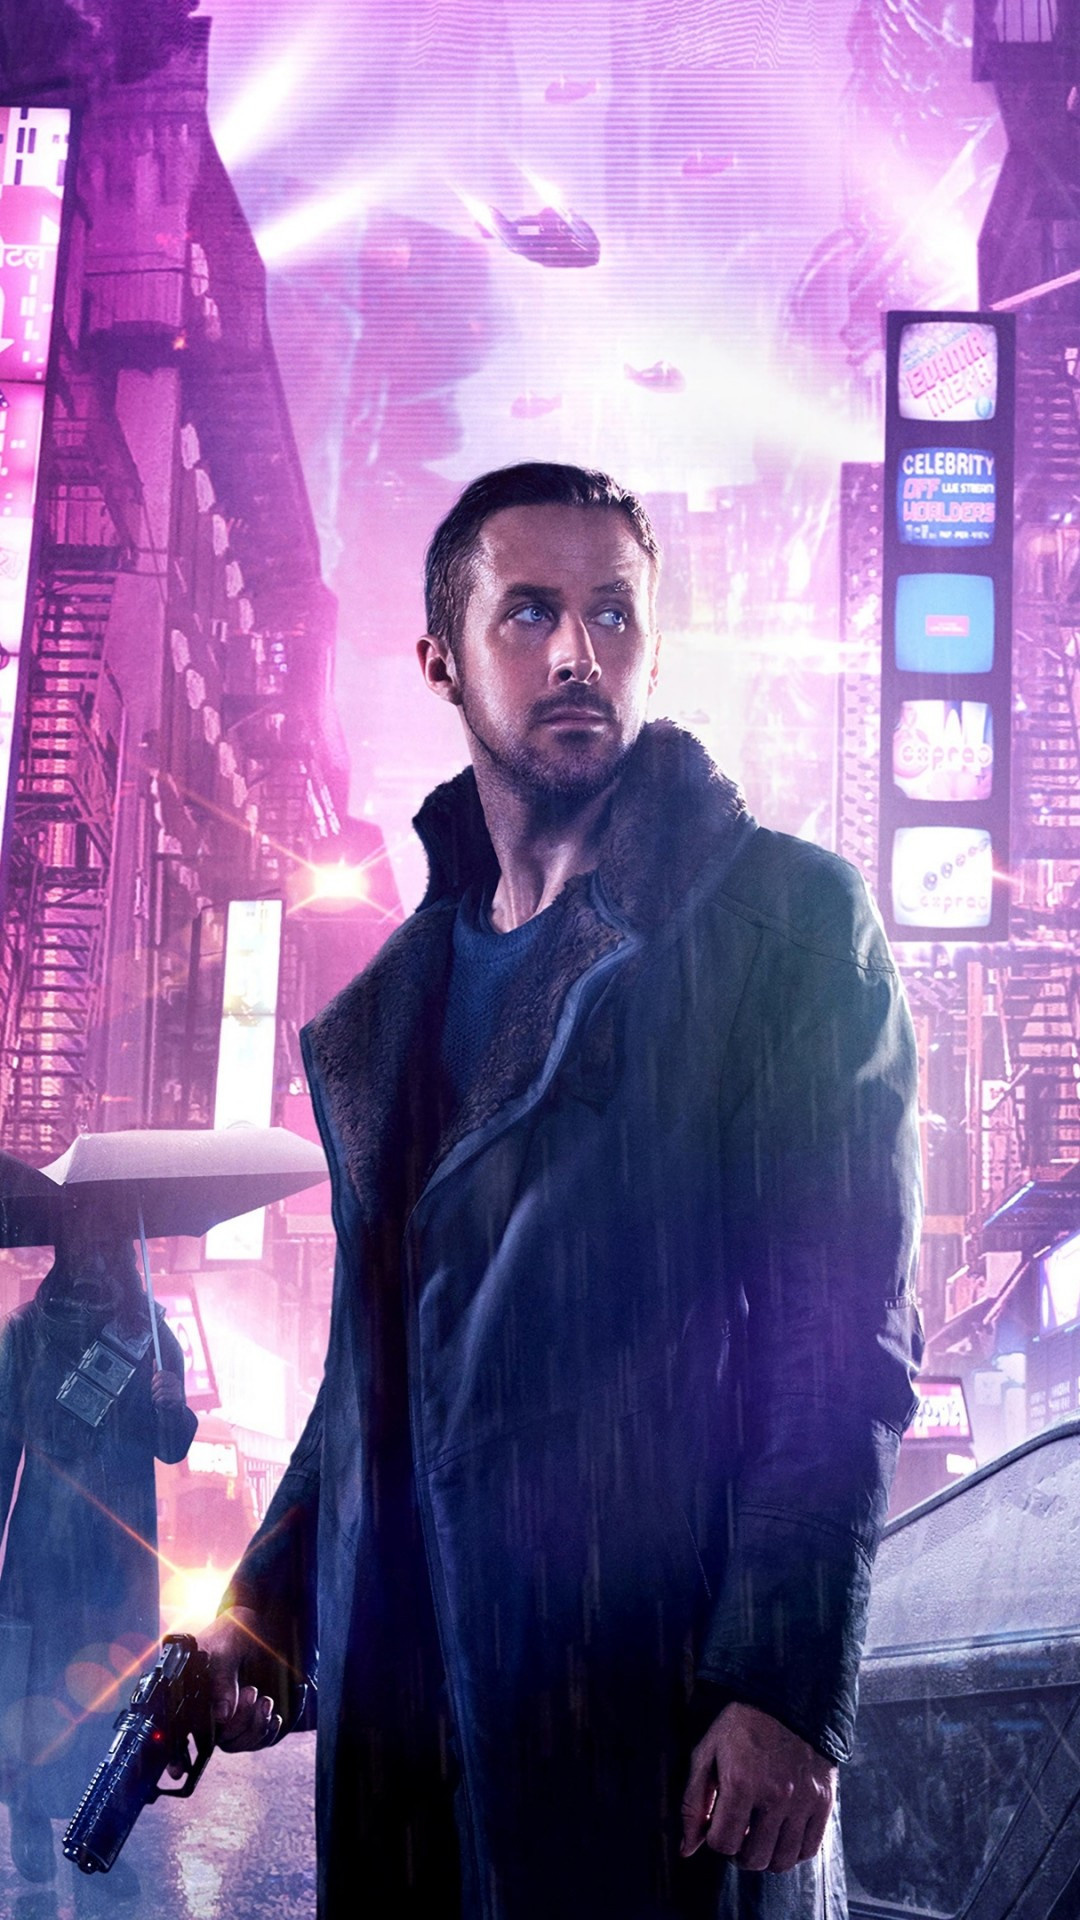 Download Blade Runner 2049, Futuristic cityscape, iPhone wallpapers, Sony Xperia wallpapers, 1080x1920 Full HD Phone